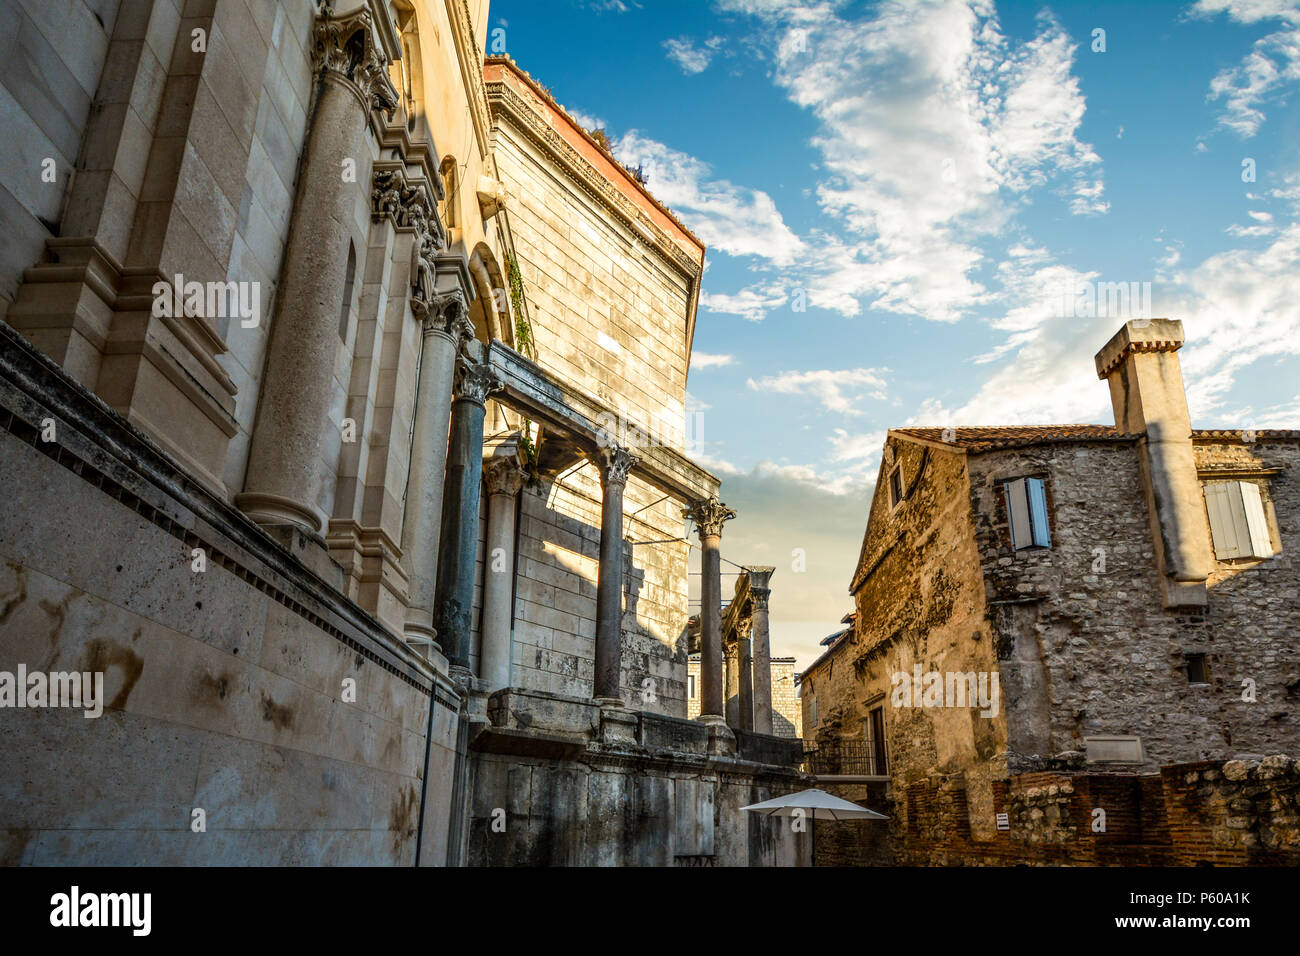 The ancient Catholic Cathedral of Saint Domnius, known locally as the Sveti Dujam in the Diocletian's Palace area of Split, Croatia. Stock Photo